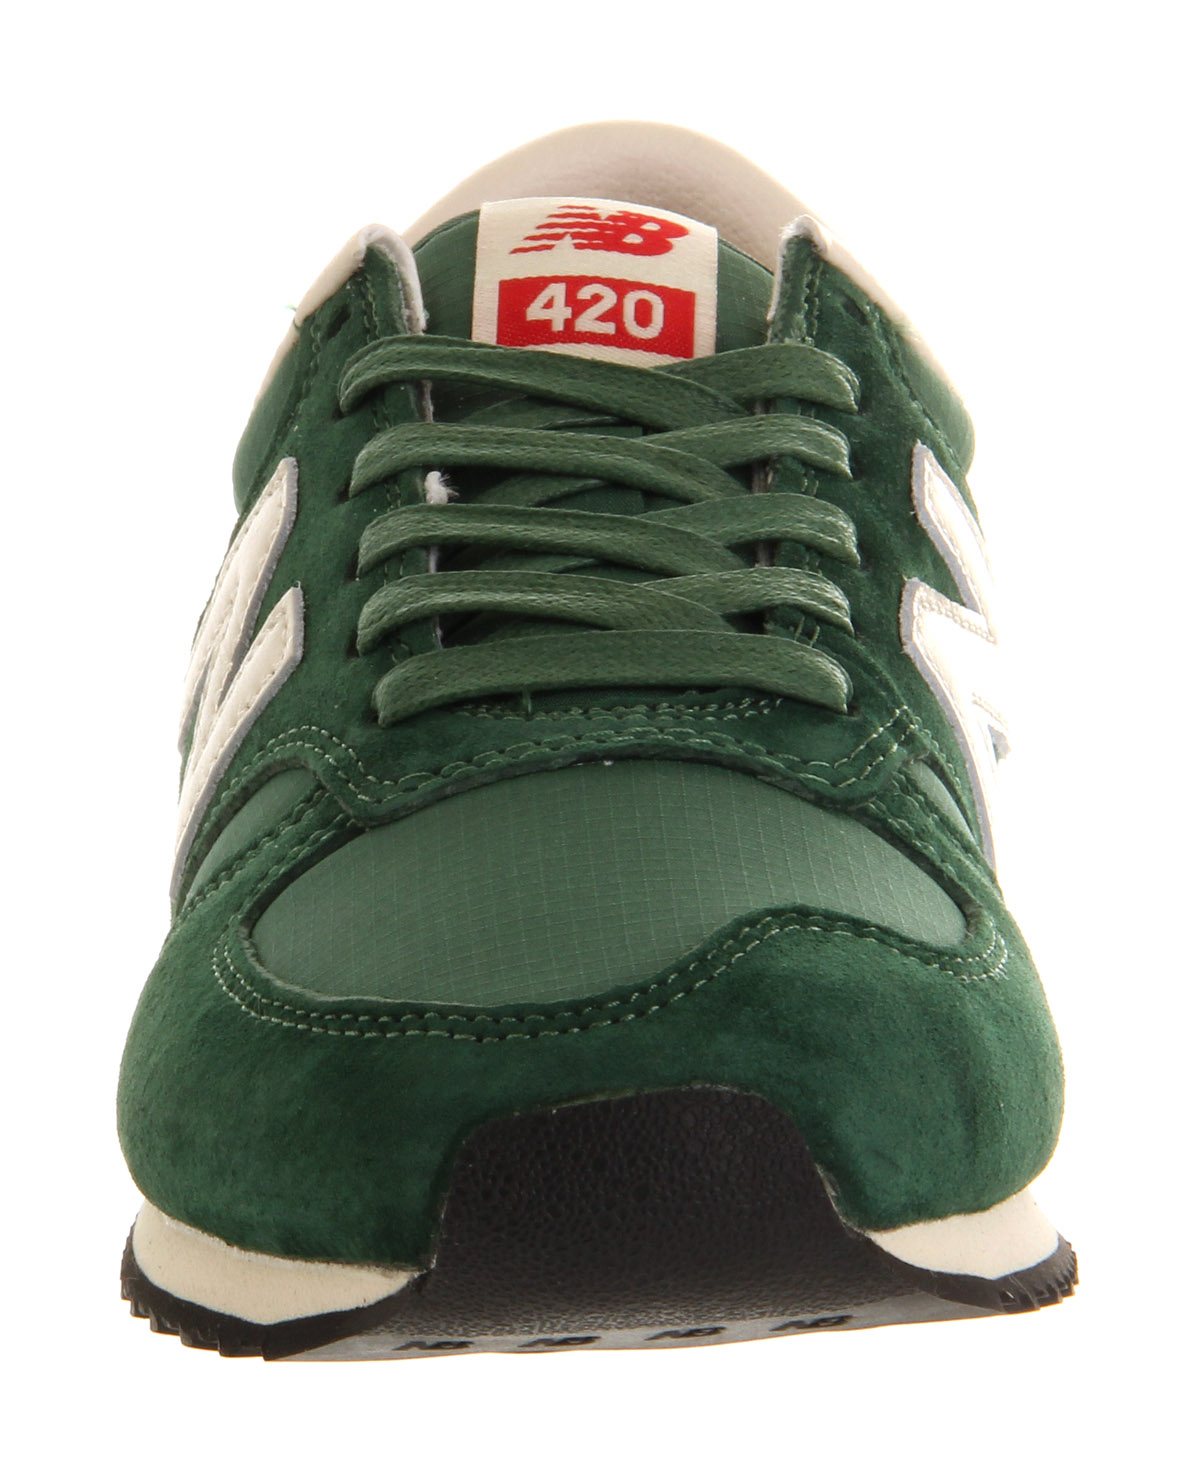 New Balance Rubber U420 in Green for Men - Lyst